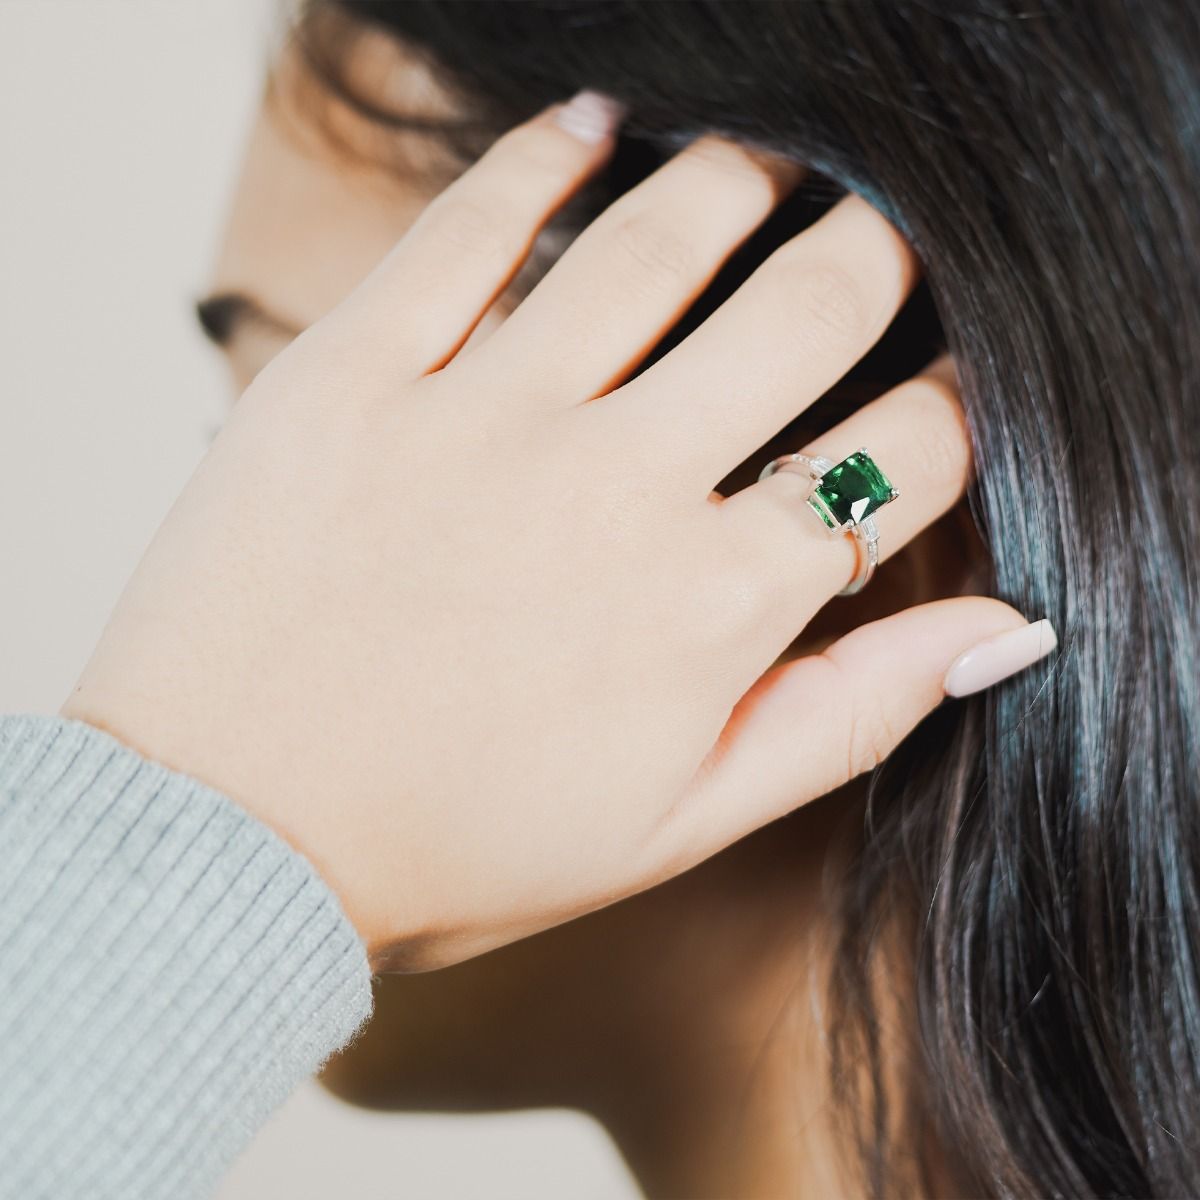 The Emerald Baguette with Tapered Baguette Shoulder Ring is a stunning art deco inspired ring featuring an immaculate baguette cut central glass stone, with tapered stone baguette sides flawlessly faceted for maximum sparkle.